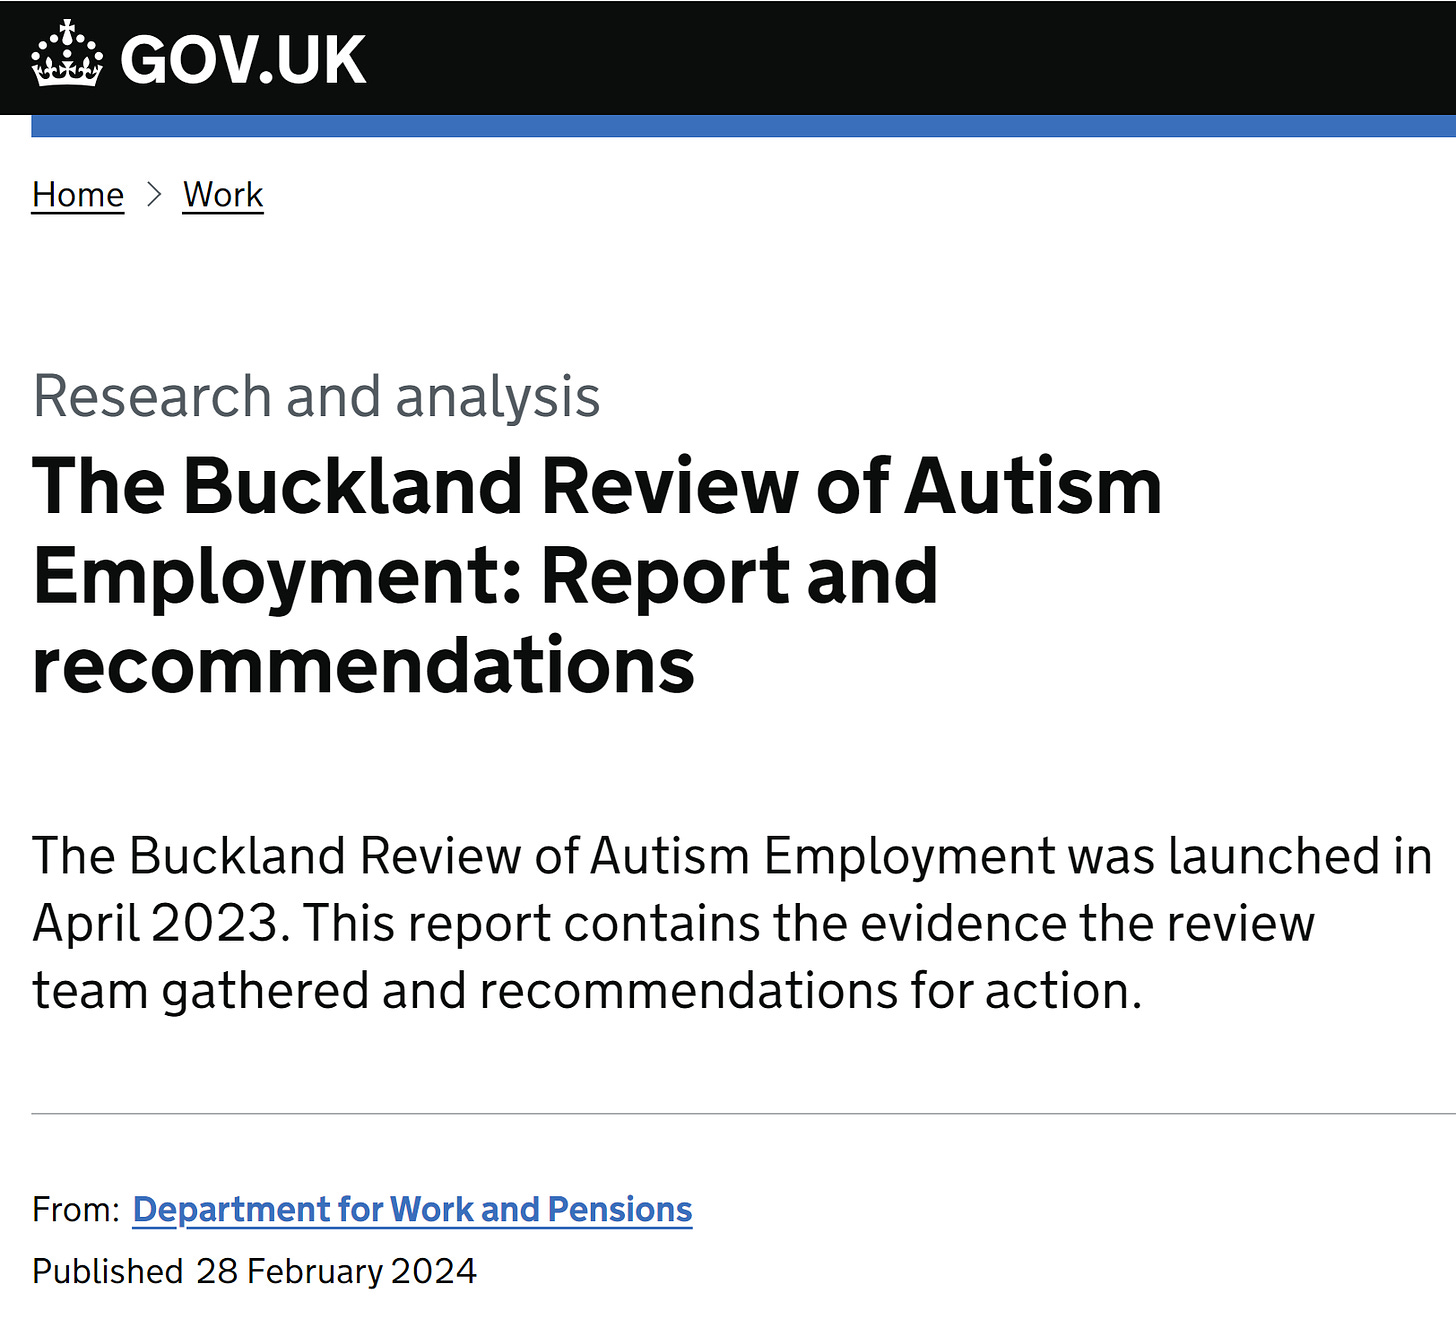 screenshot of the gov.uk web page, which shows the headline "The Buckland Review of Autism Employment: Report and recommendations" 